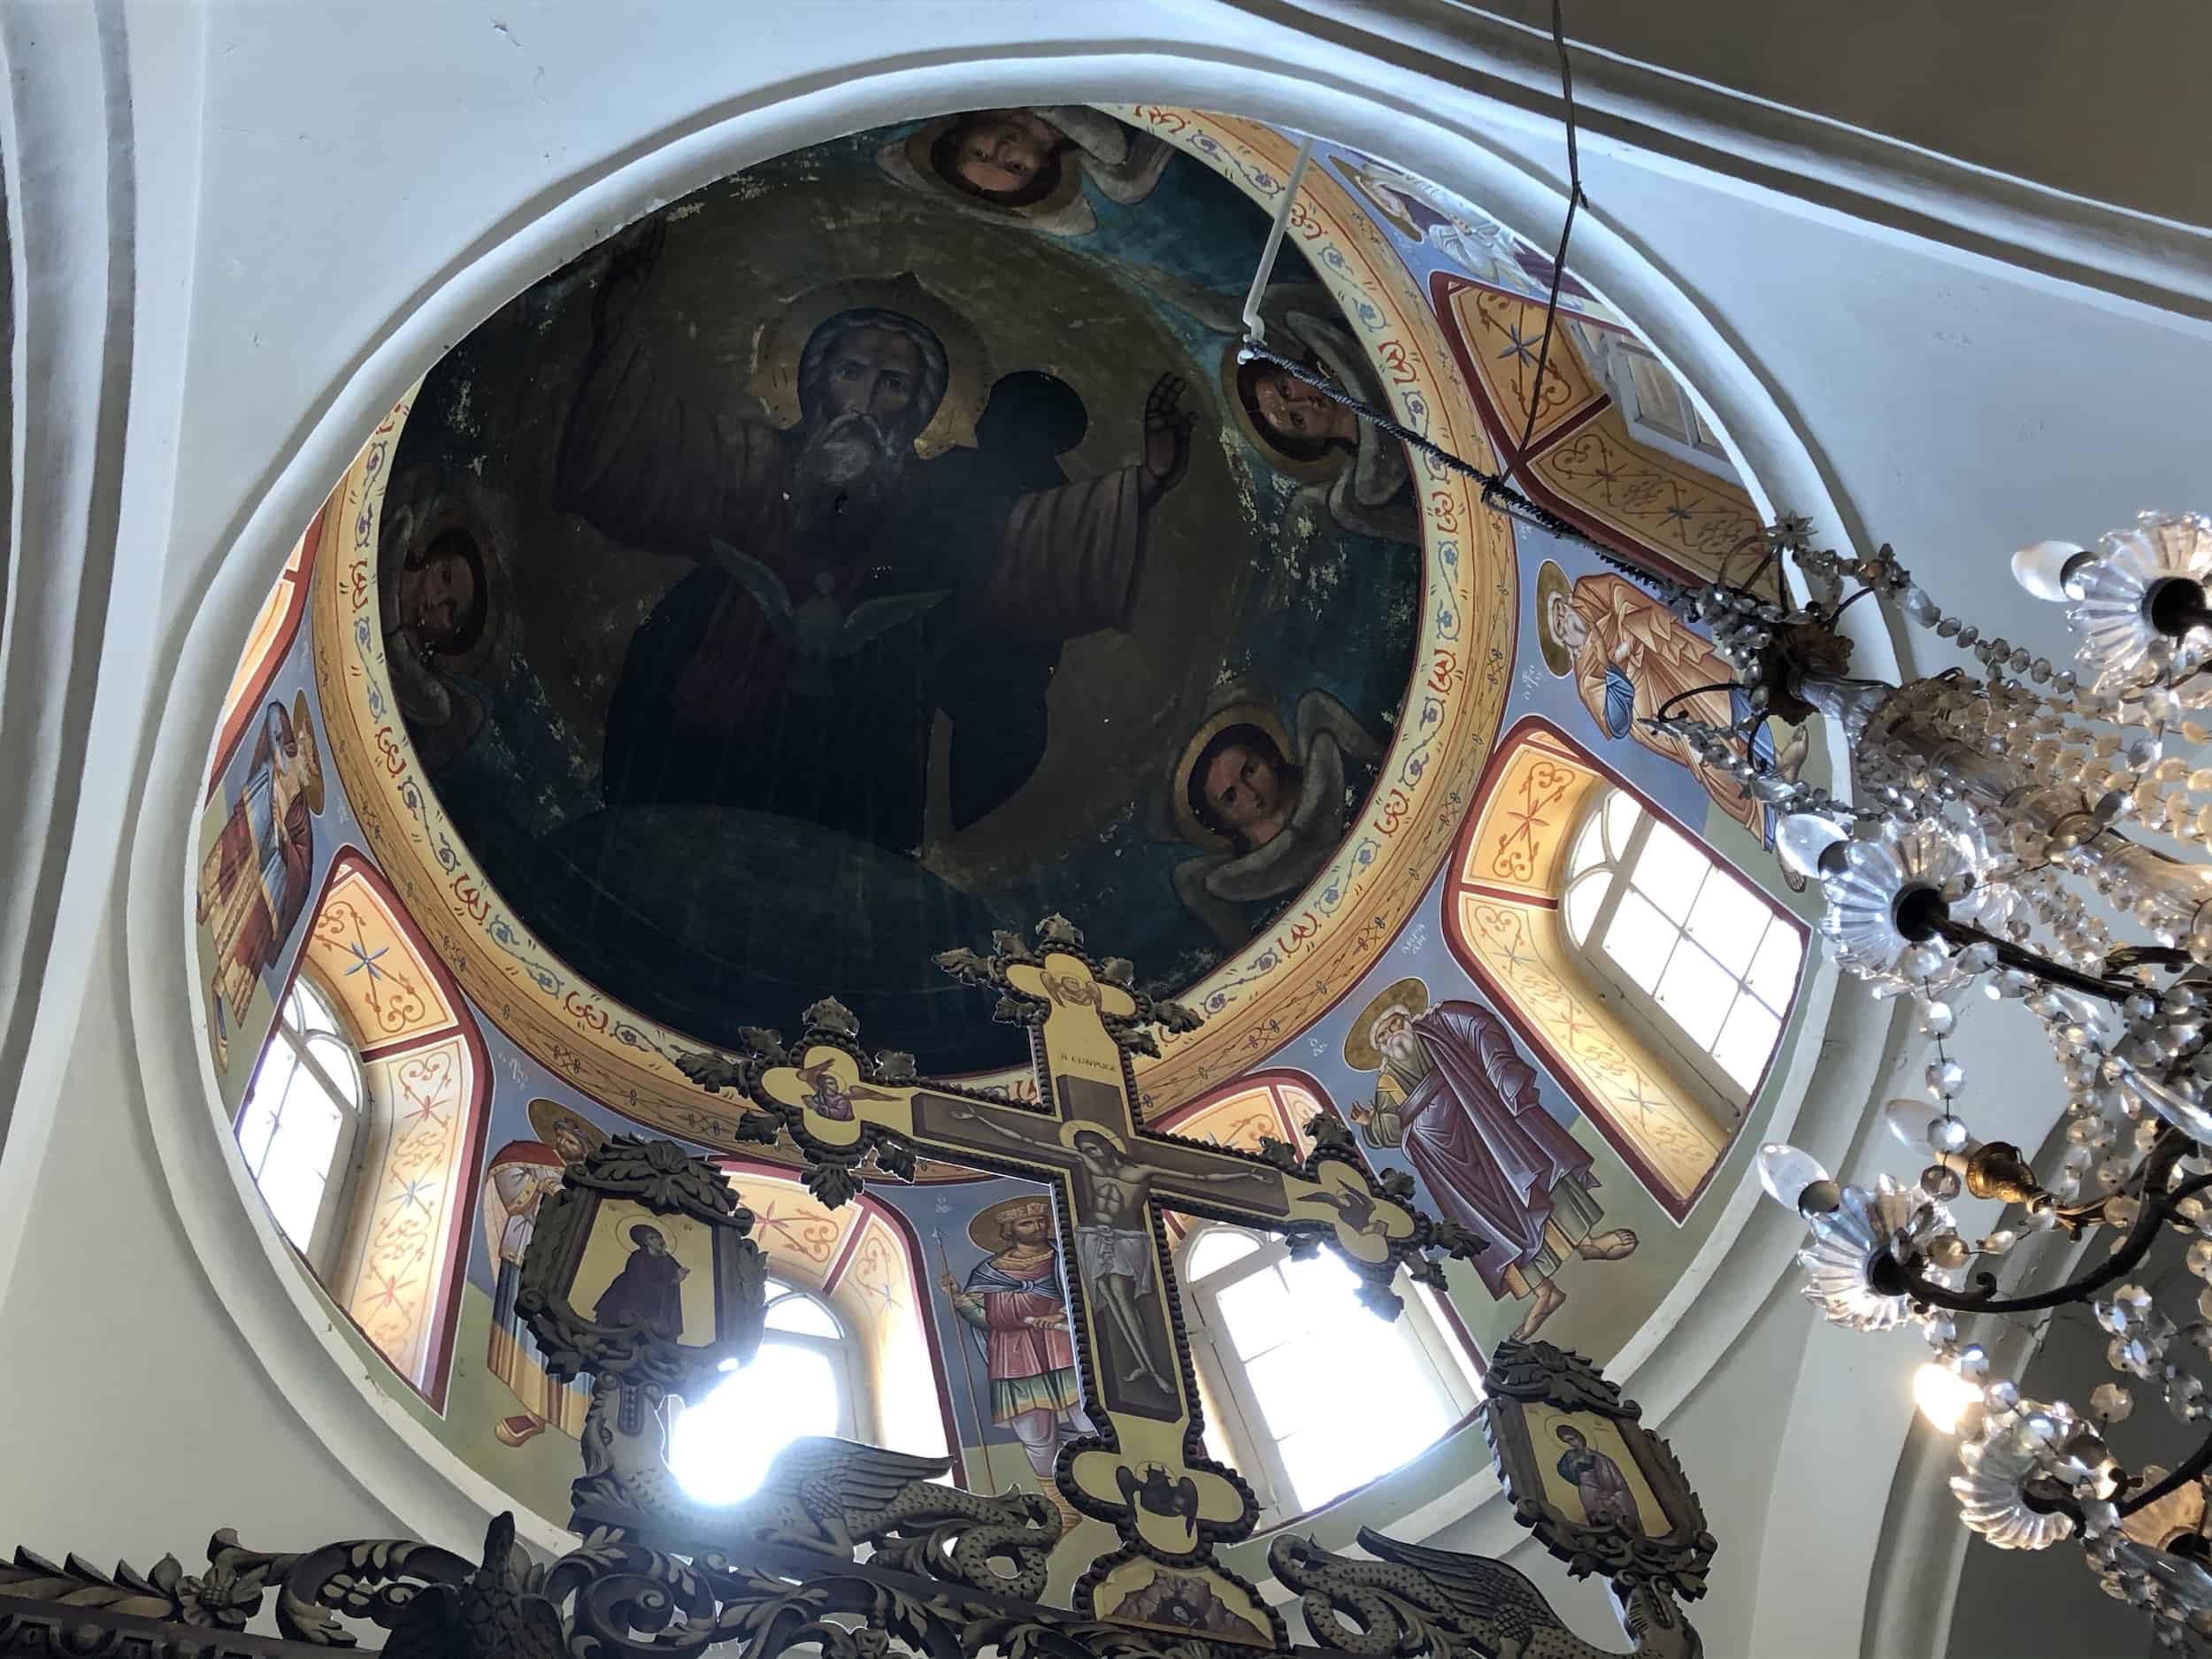 Dome of the Church of the Annunciation at the Monastery of the Temptation in Jericho, Palestine